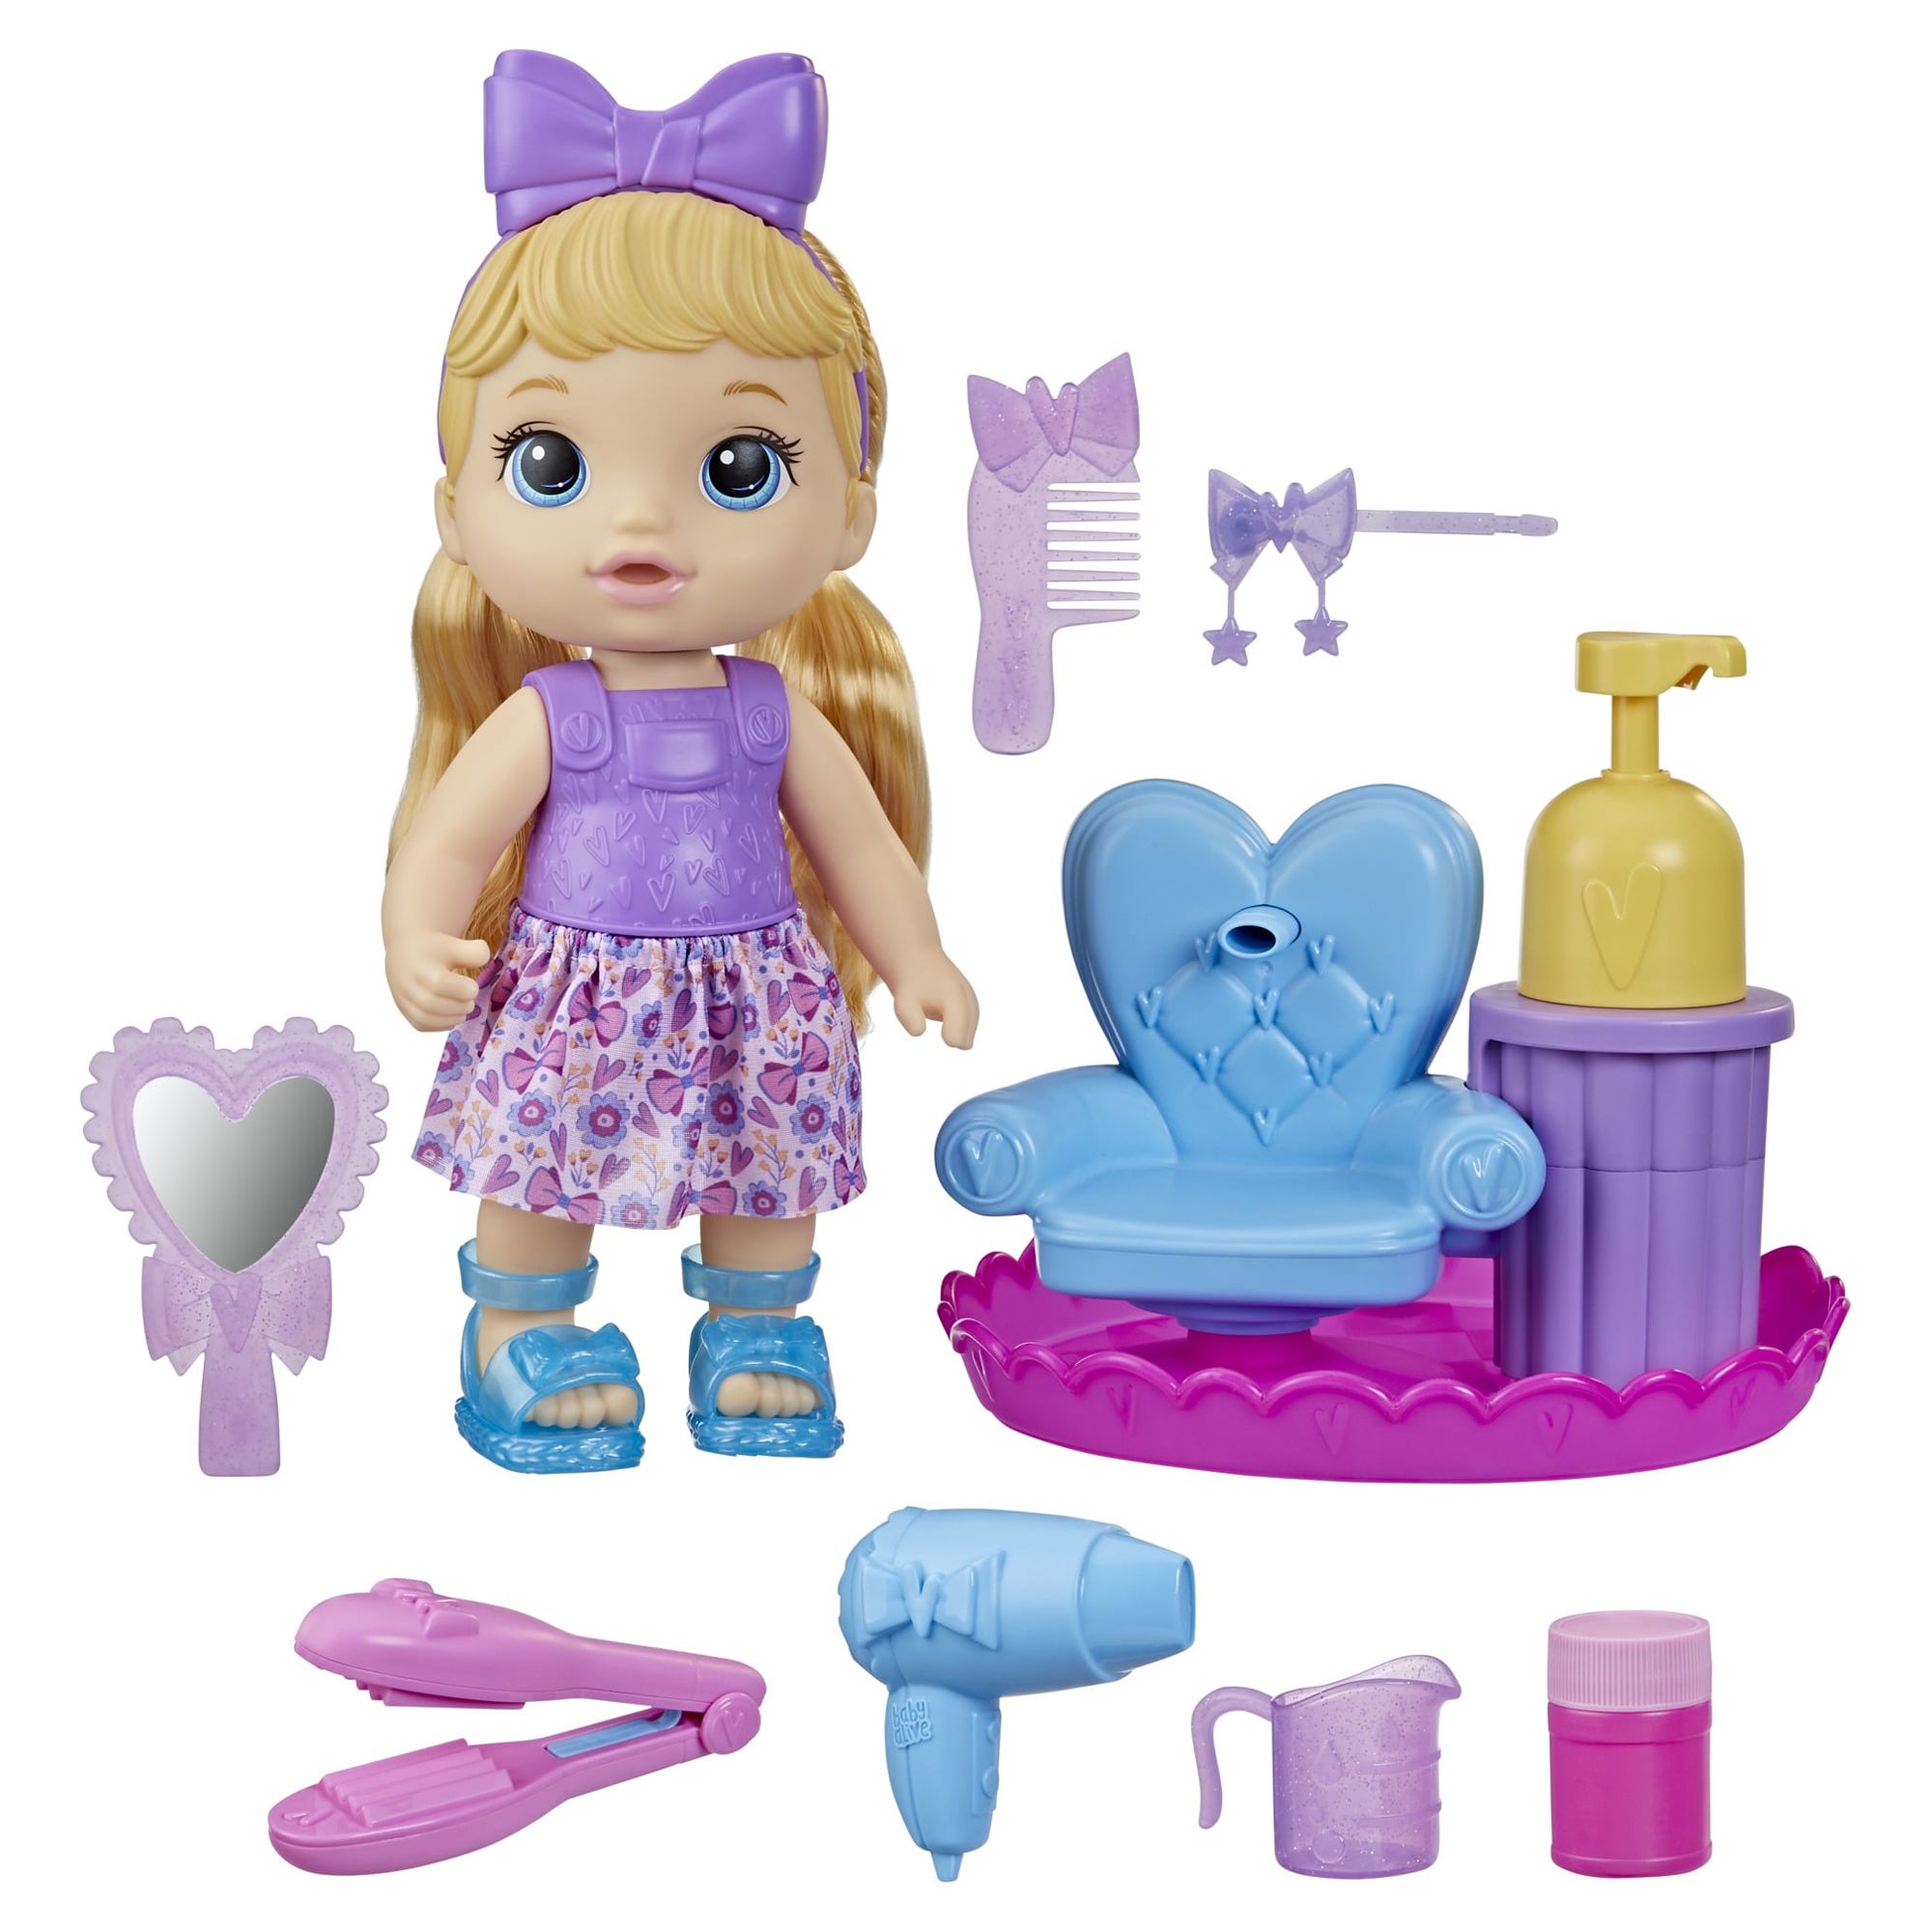 Gifts for 5 year old girls in Toys for Kids 5 to 7 Years 